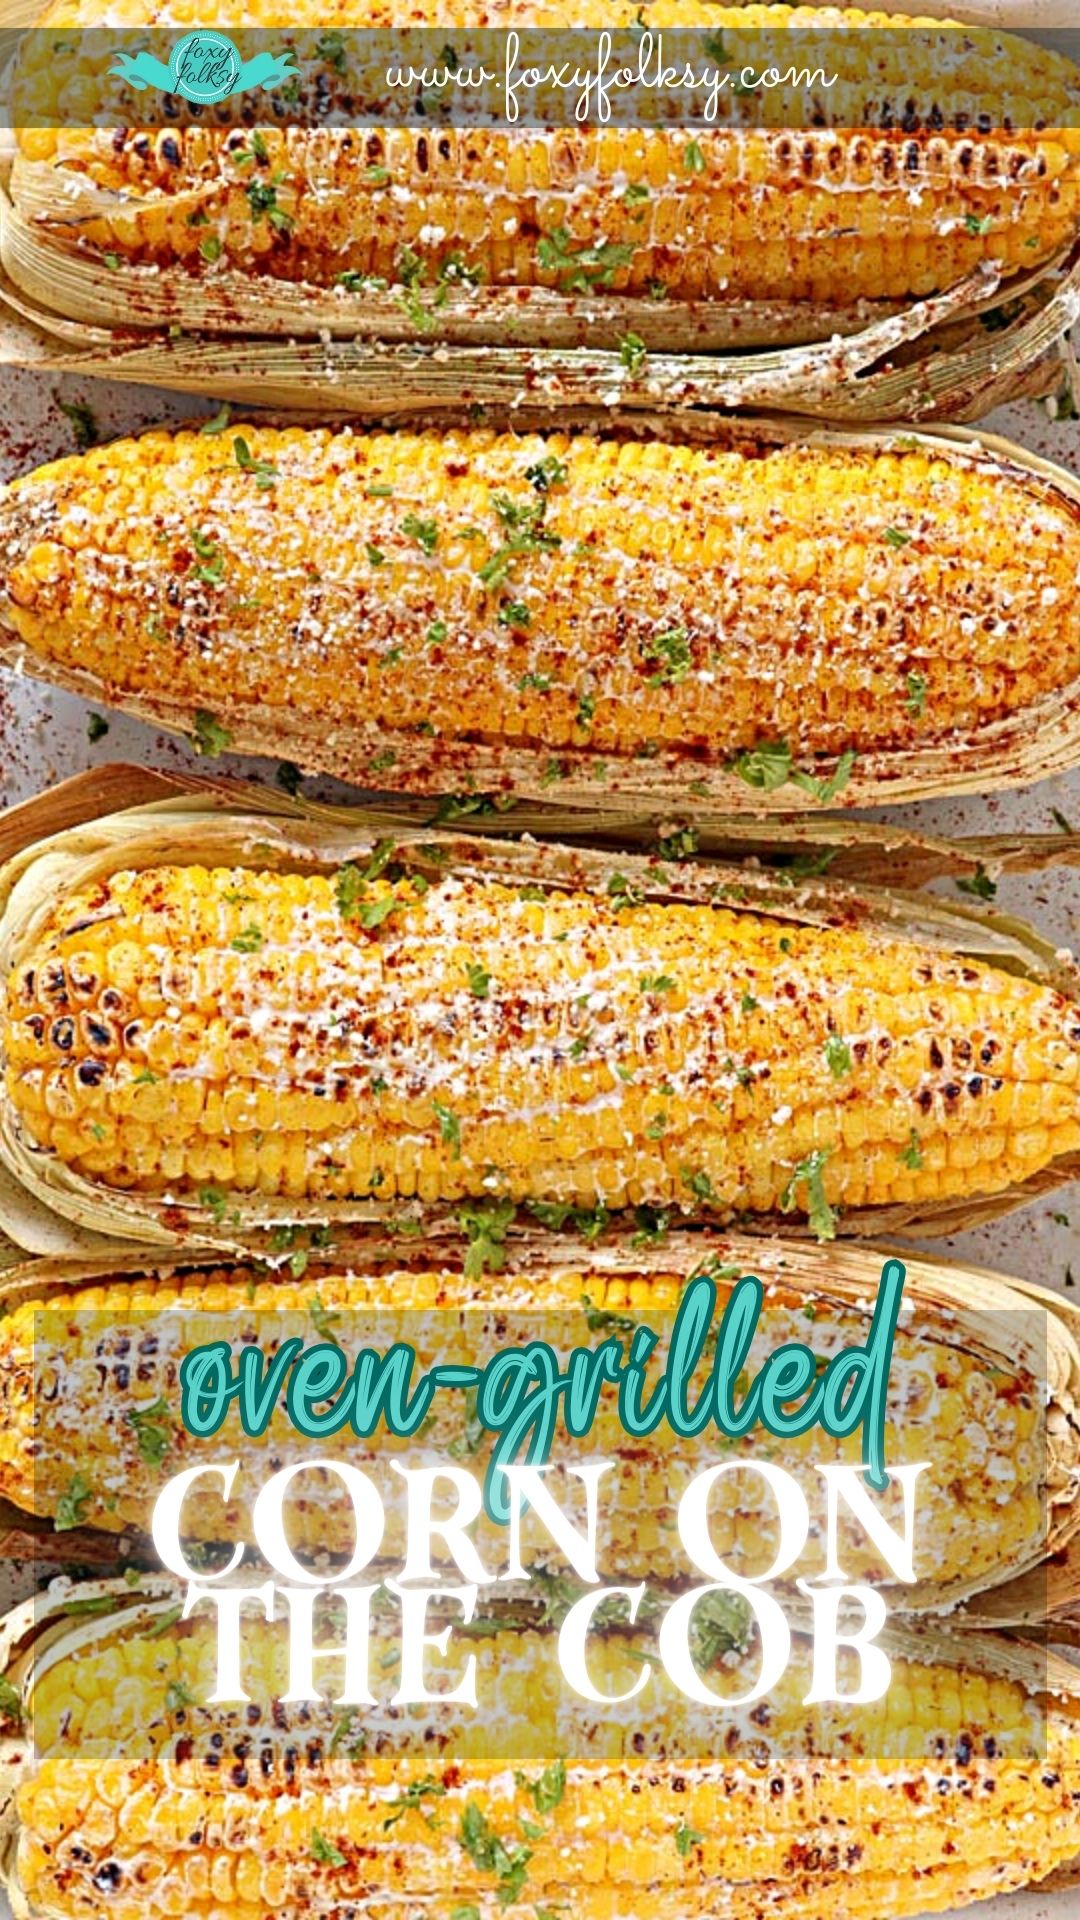 Oven grilled corn on the cob.